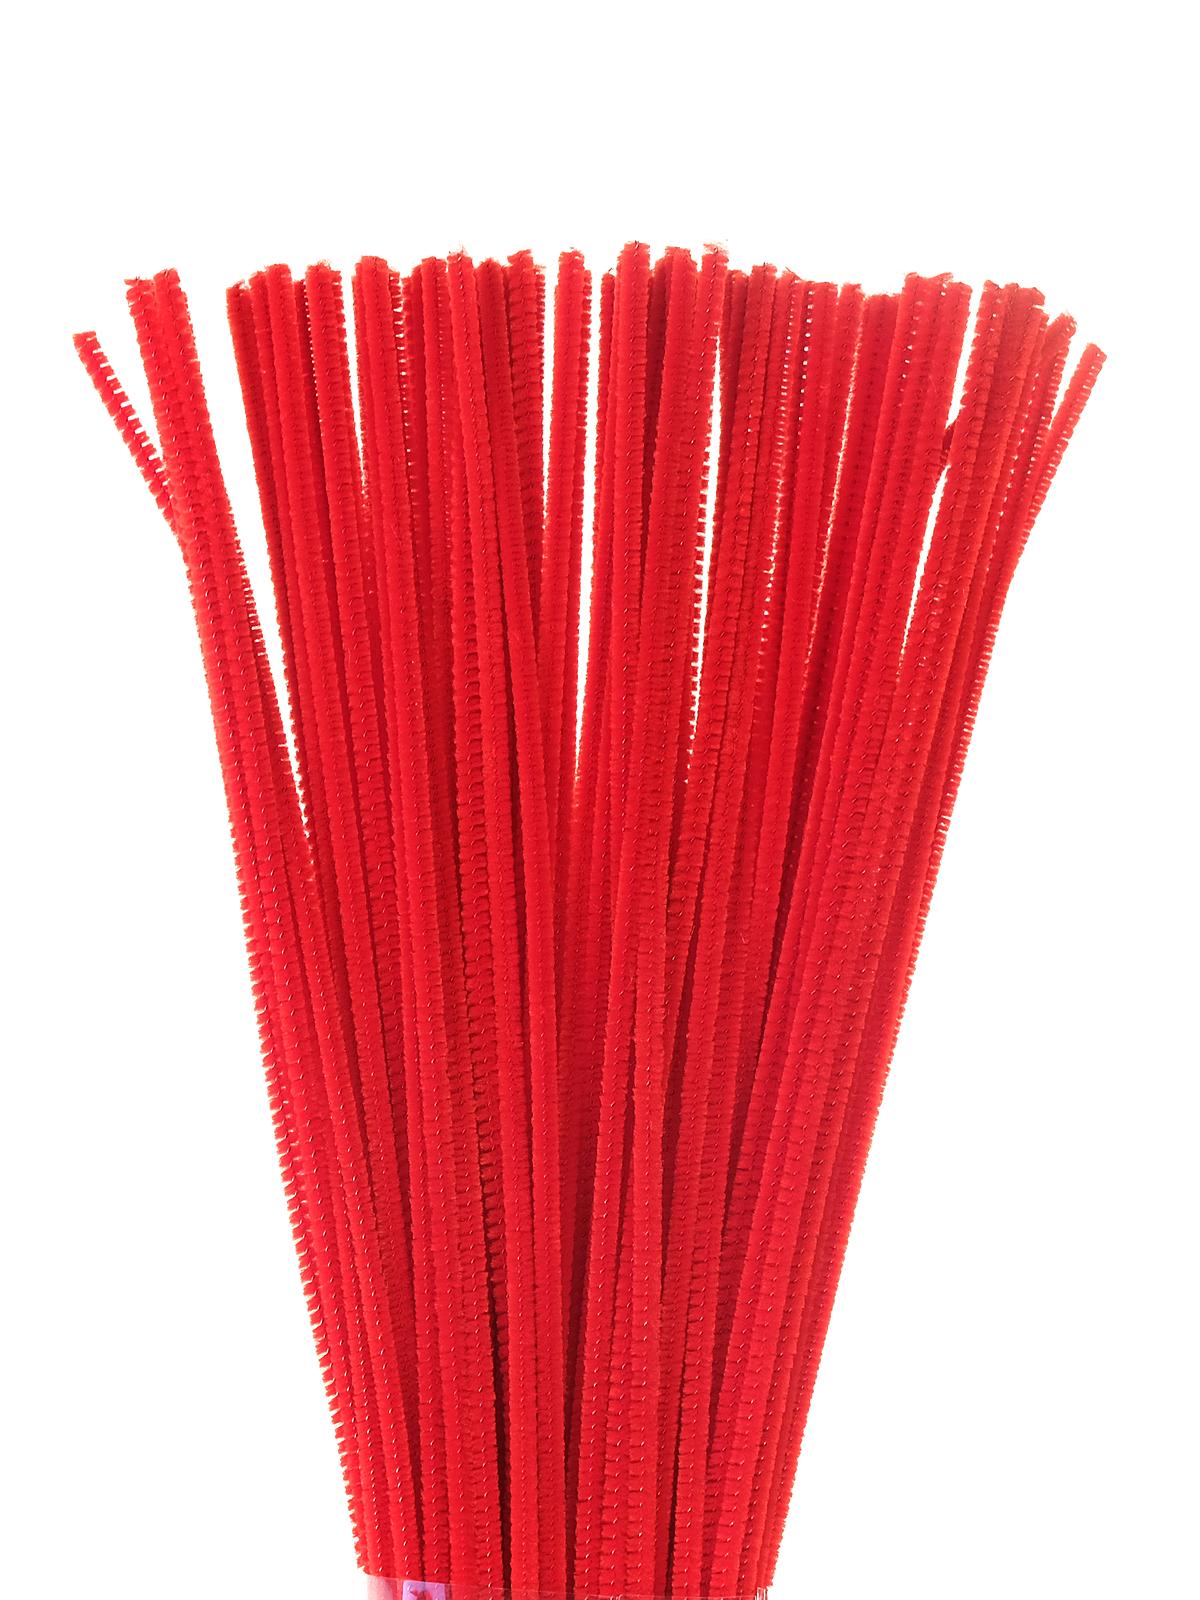 Chenille Stems 4 Mm X 12 In. 100 Pieces Red